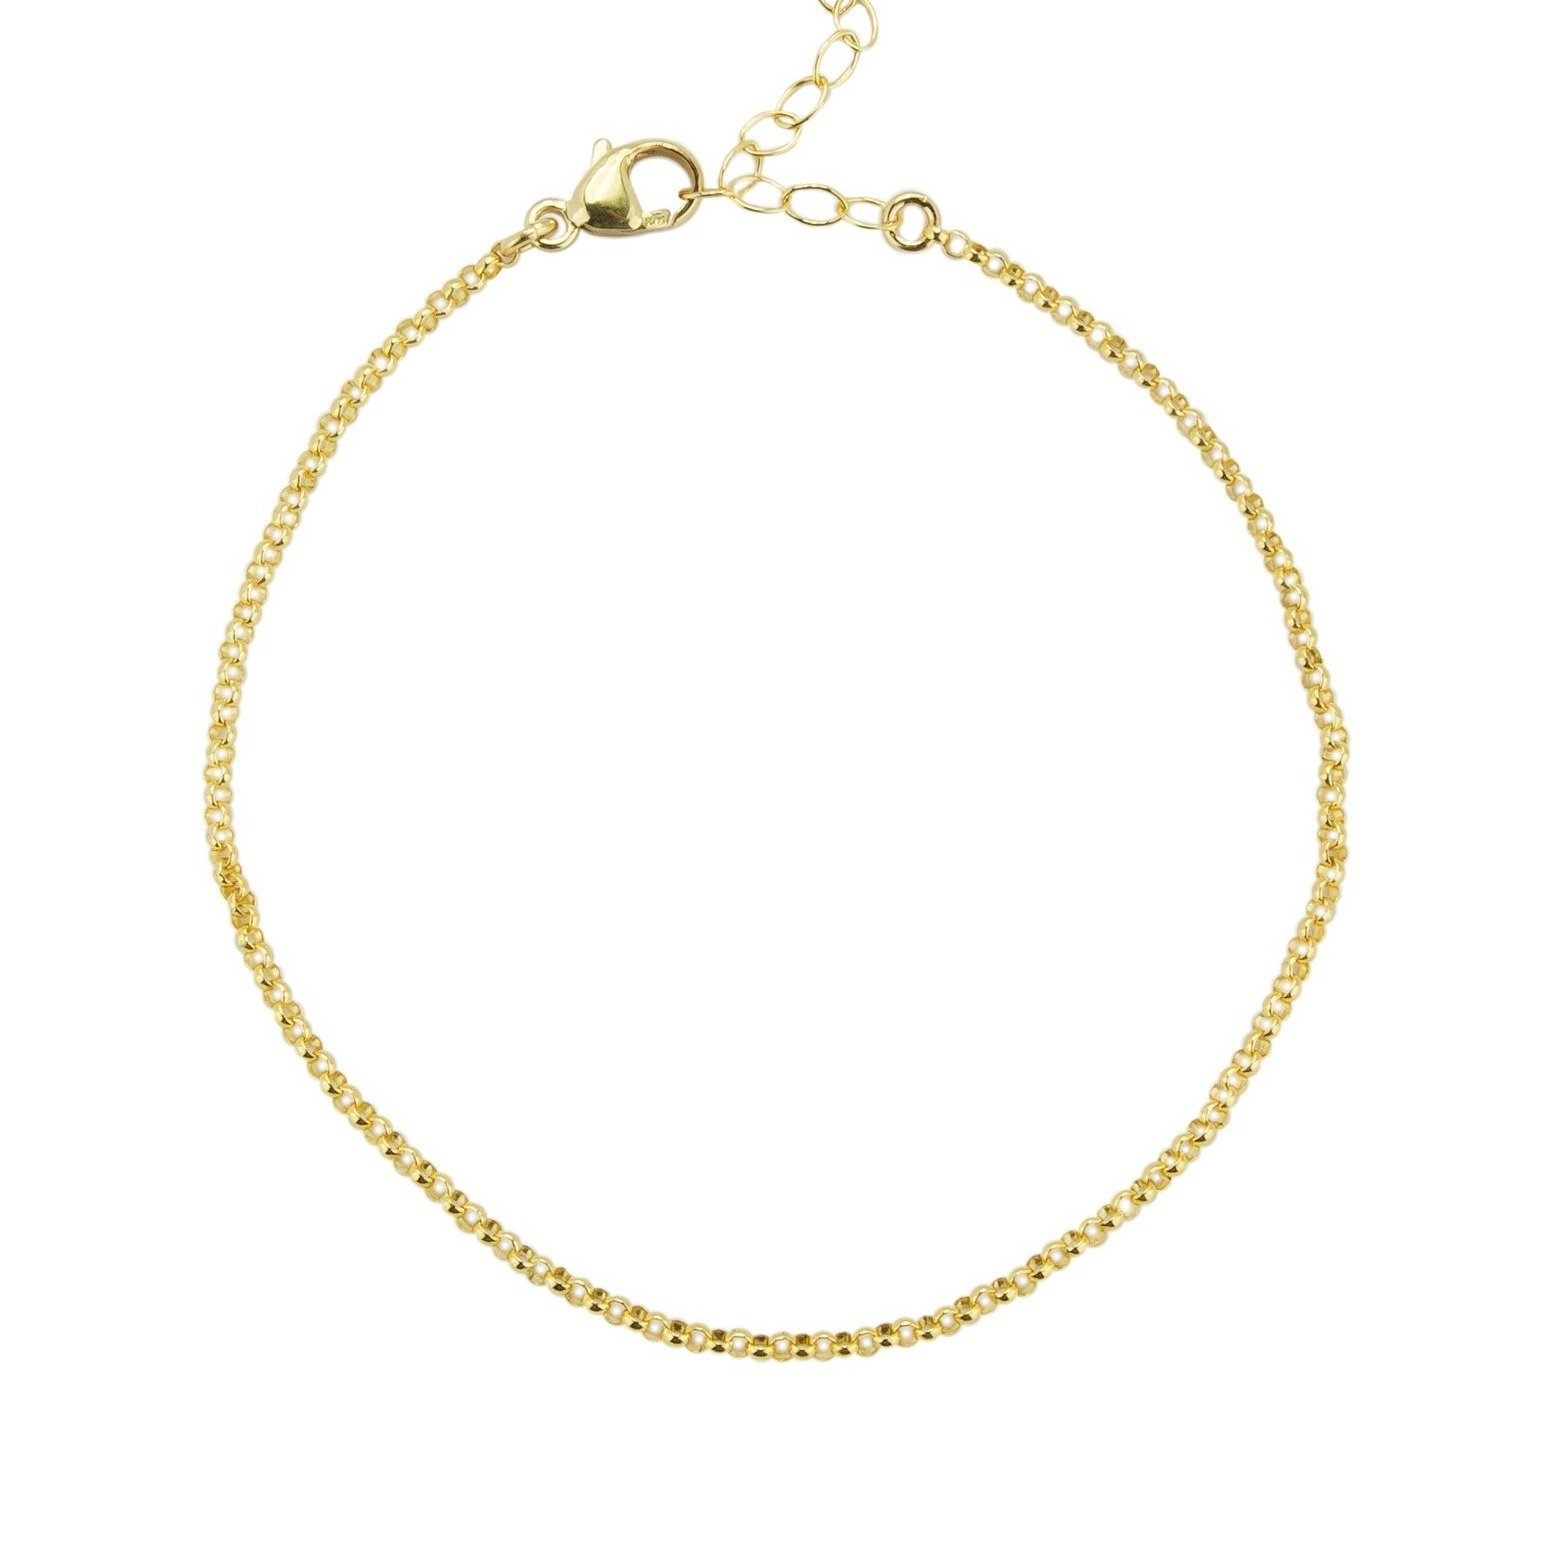 Gold Rolo Chain Bracelet against a white background.